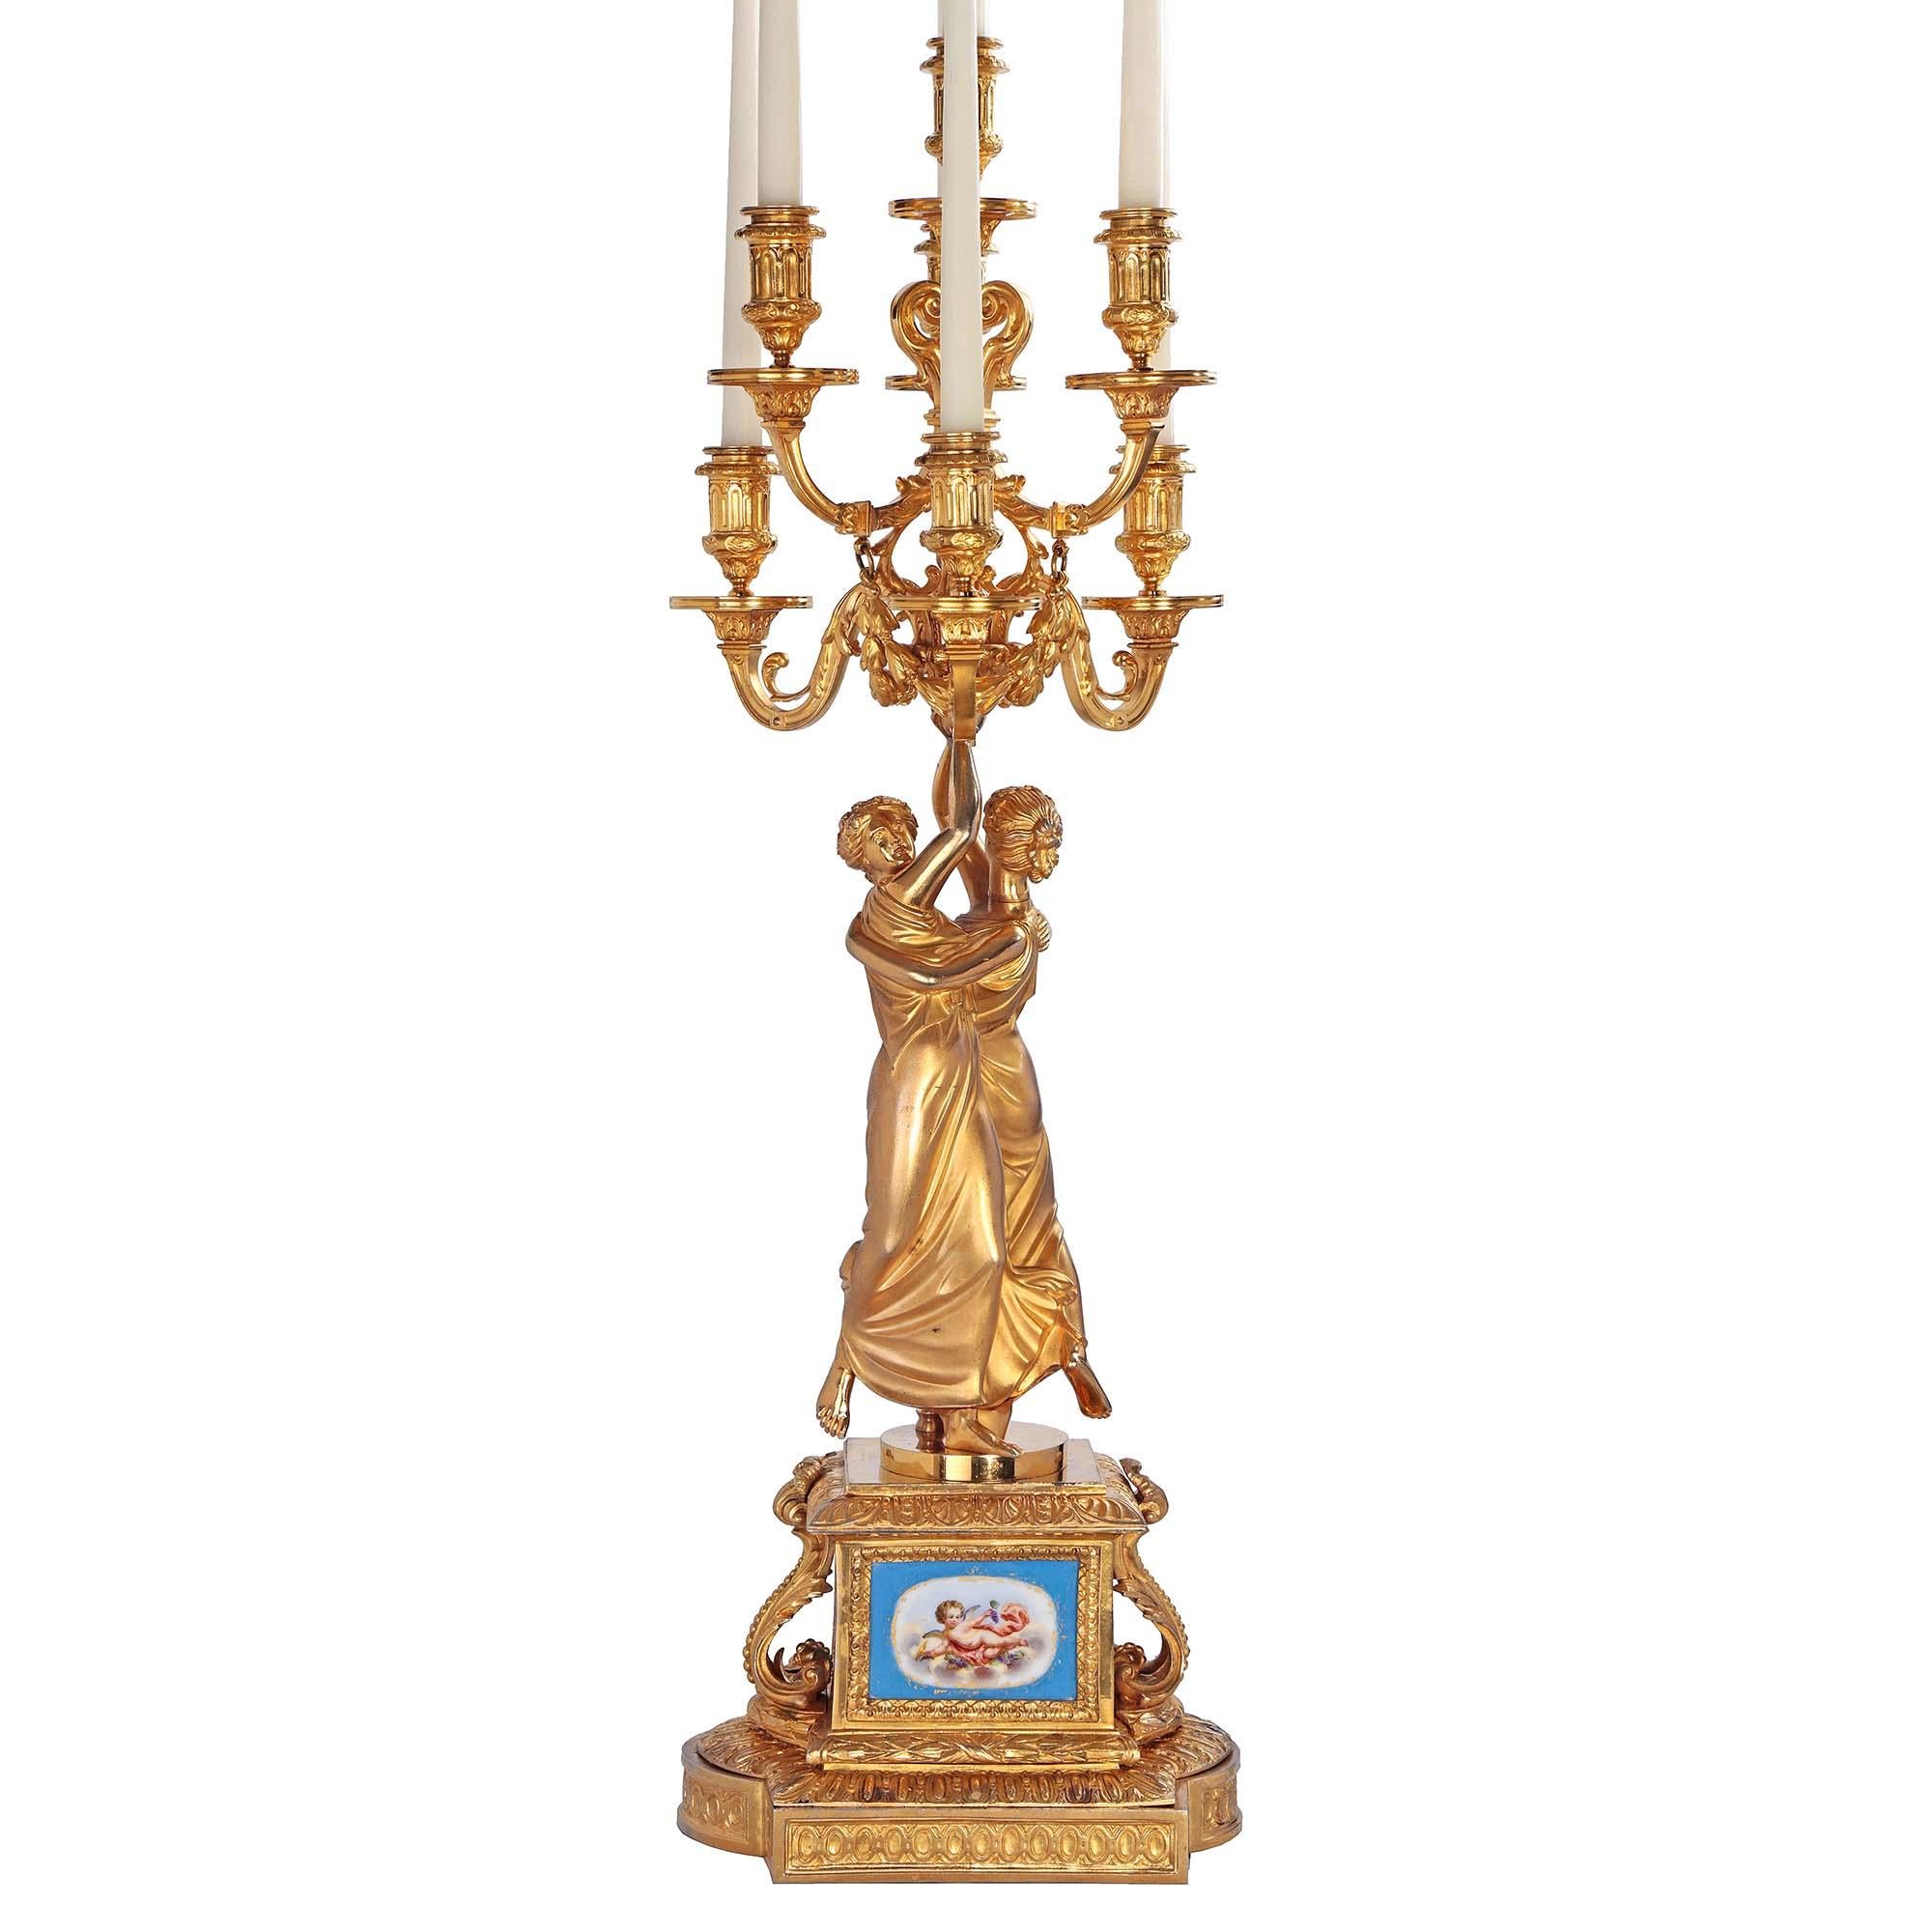 A stunning true pair of French 19th century Louis XVI st. Belle Epoque period ormolu and Sèvre sporcelain candelabras. Each seven arm candelabra is raised by a rectangular base with elegant rounded sides and recessed ormolu oval patterns. The